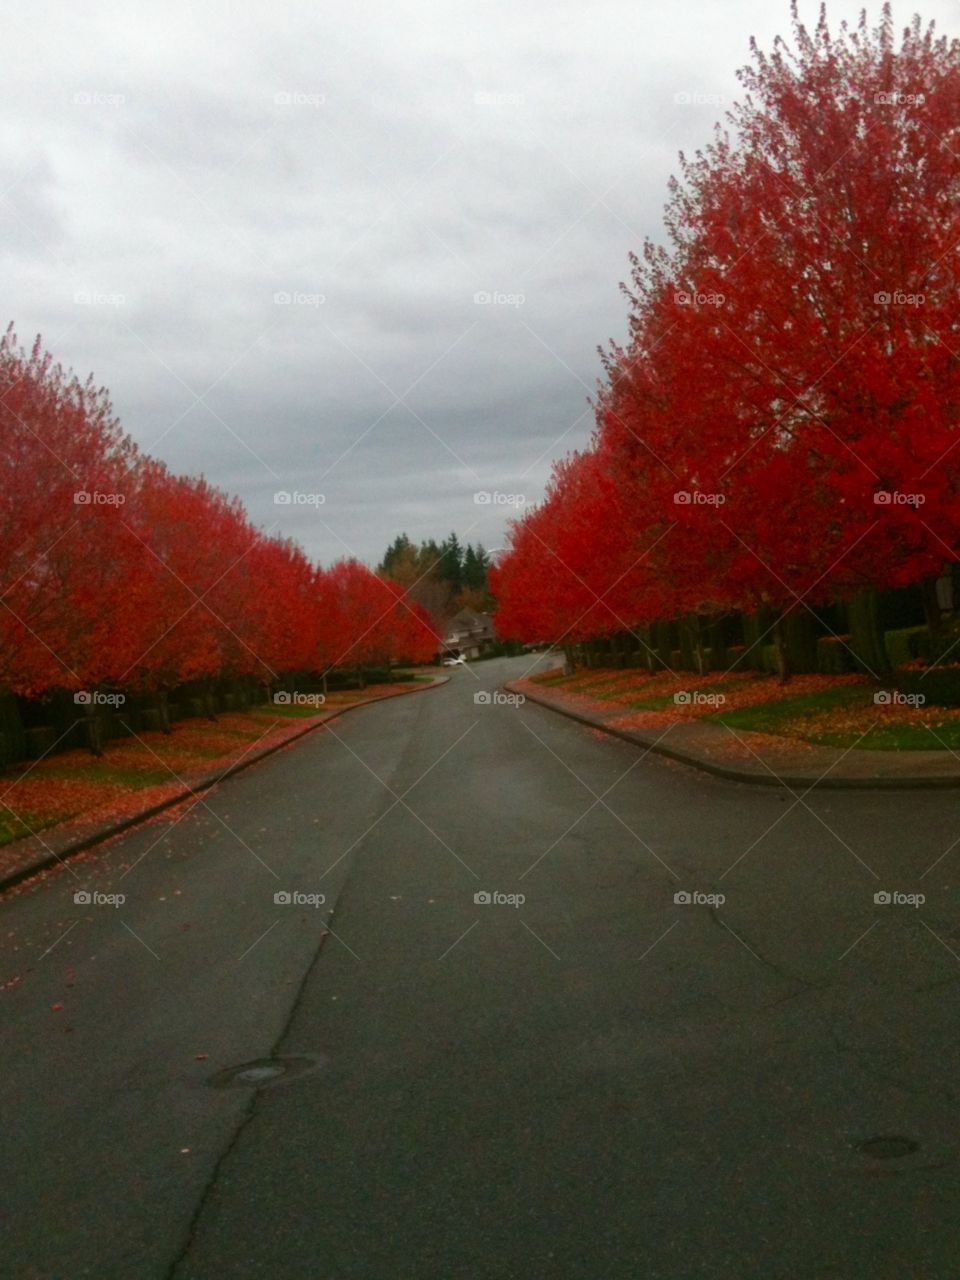 Intense red trees